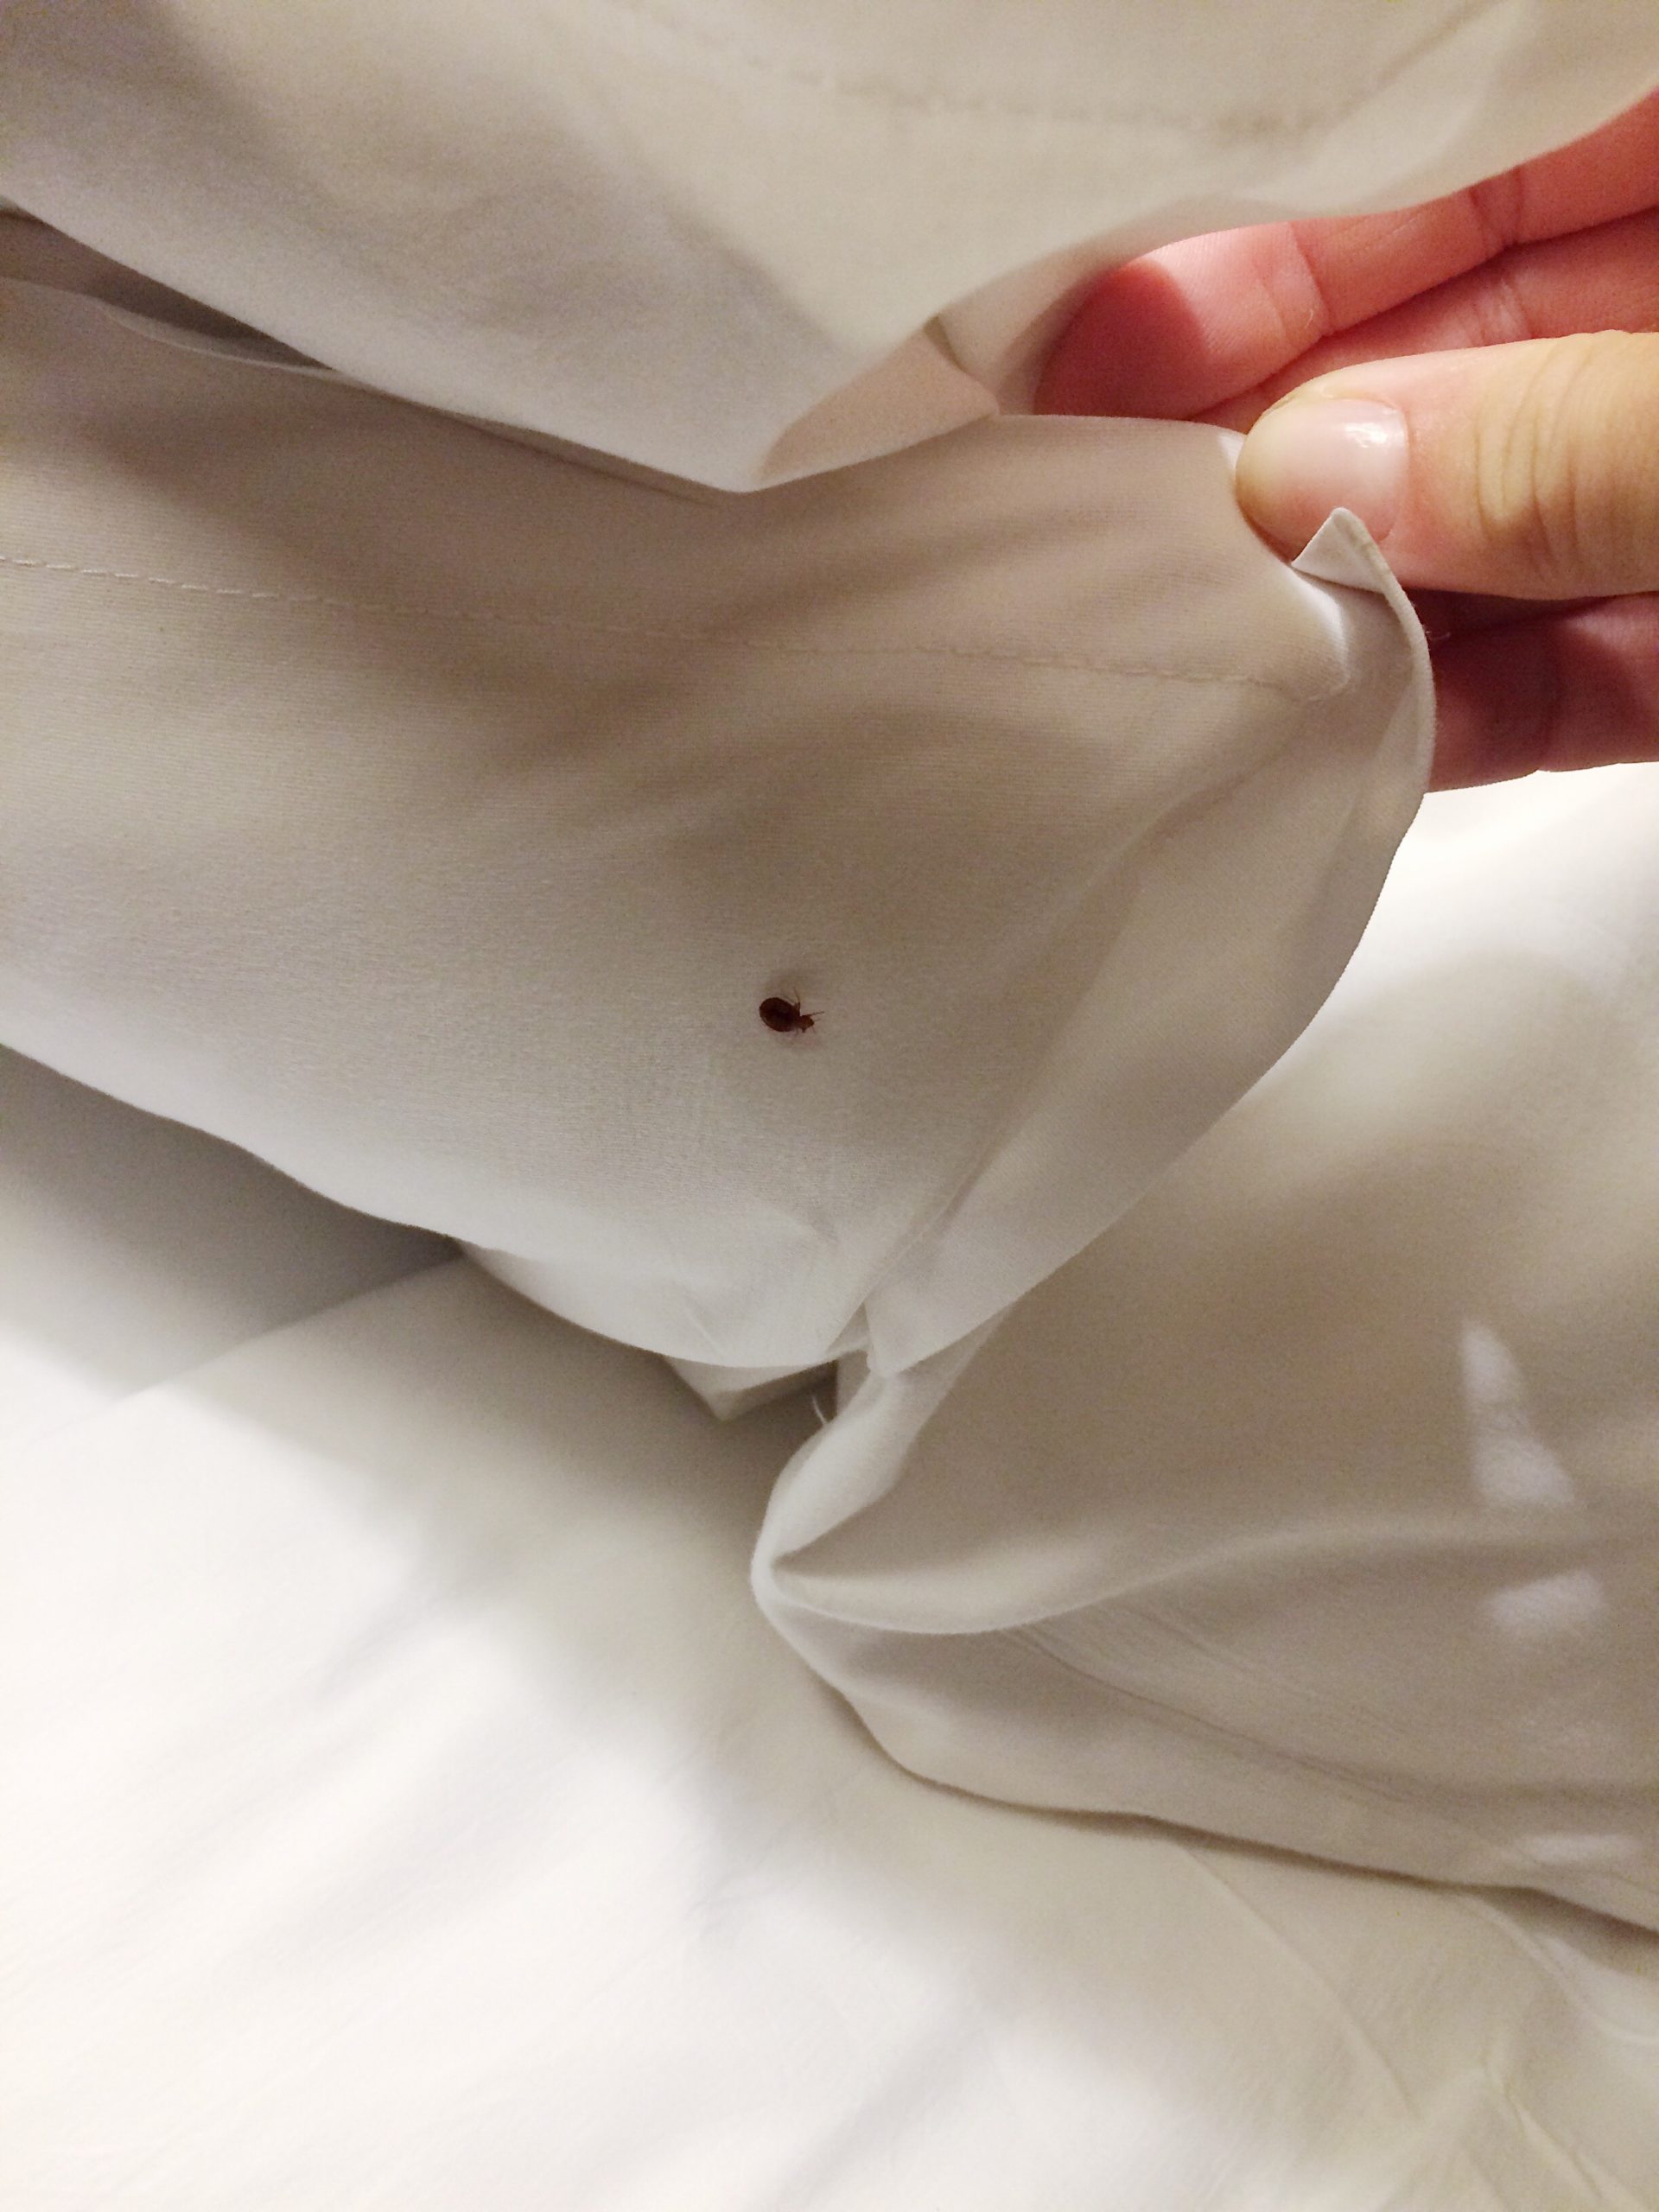 A person holding up a bed sheet with a single bed bug under the sheet.